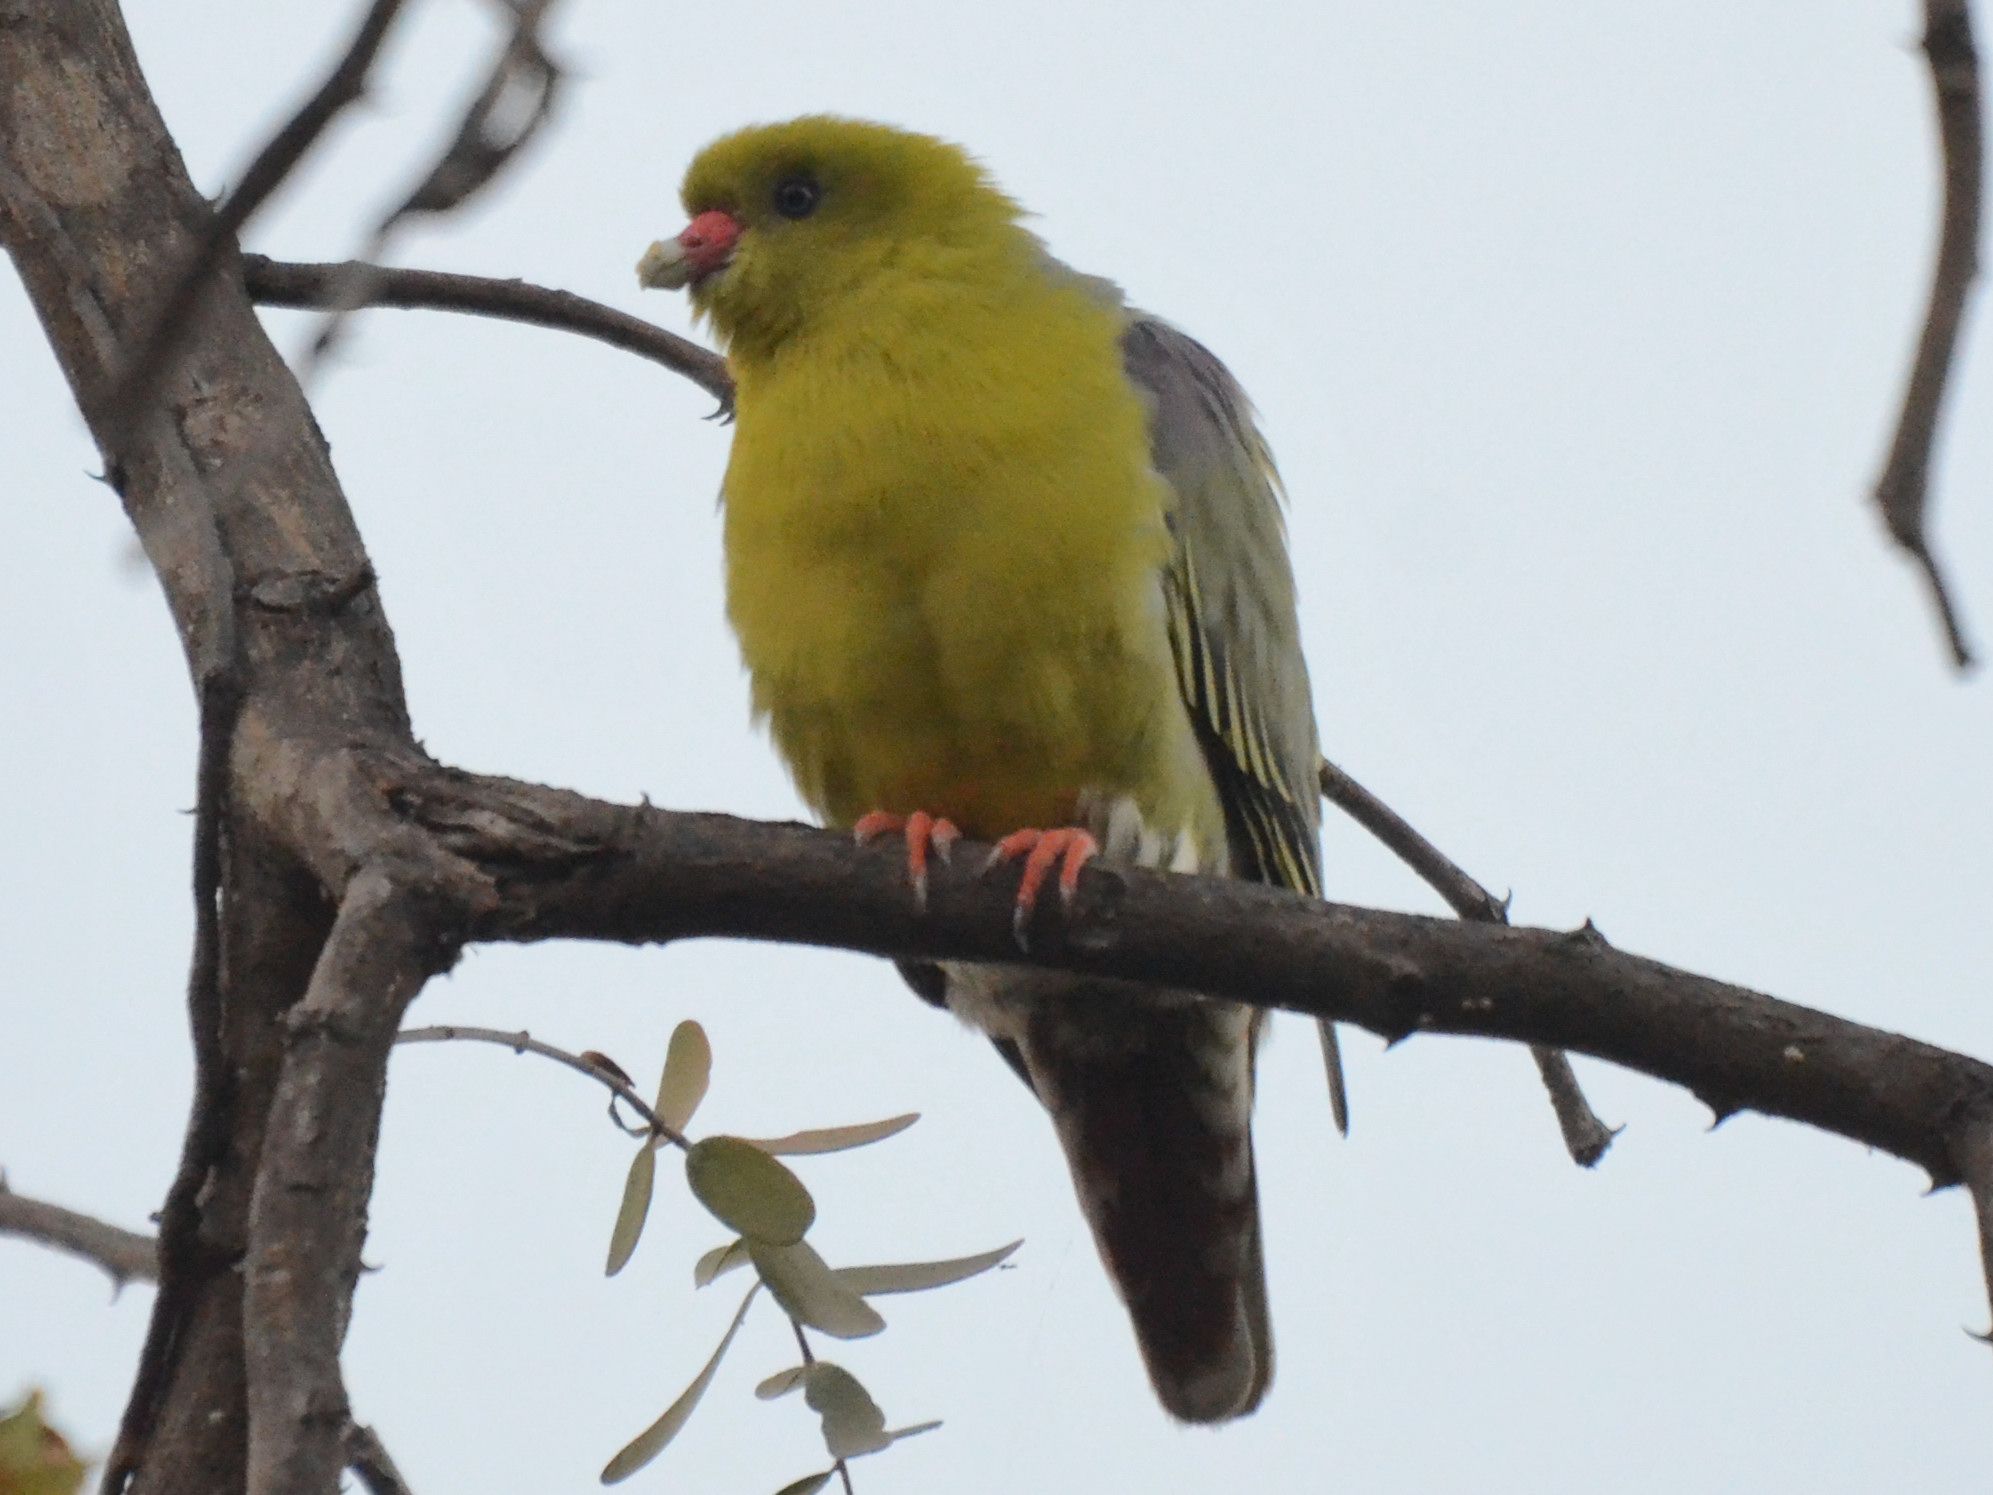 Click picture to see more African Green-Pigeons.